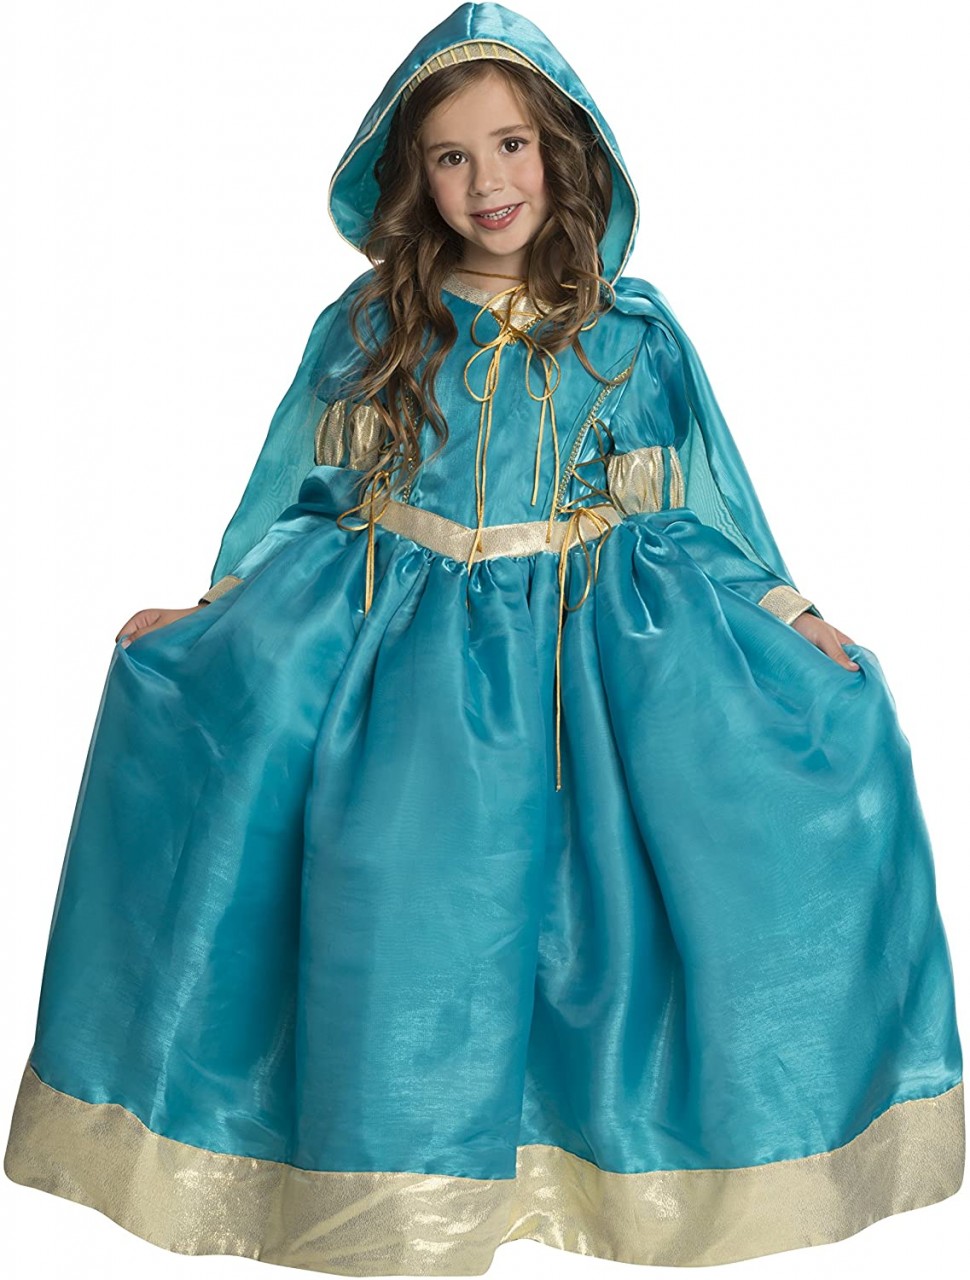 Princess Emma Deluxe Toddler Costume